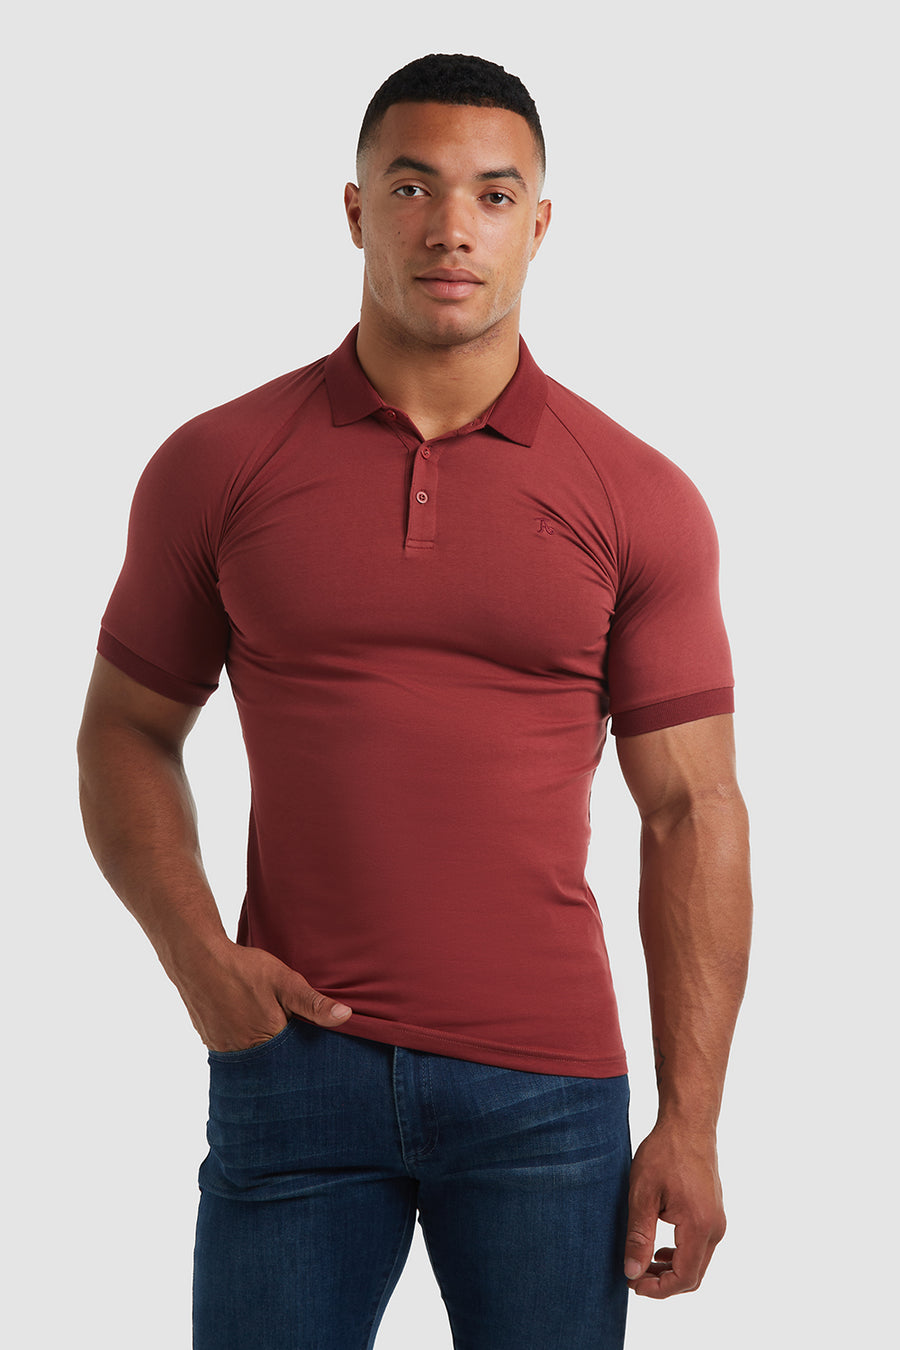 Athletic Fit Polo Shirt in Merlot - TAILORED ATHLETE - USA